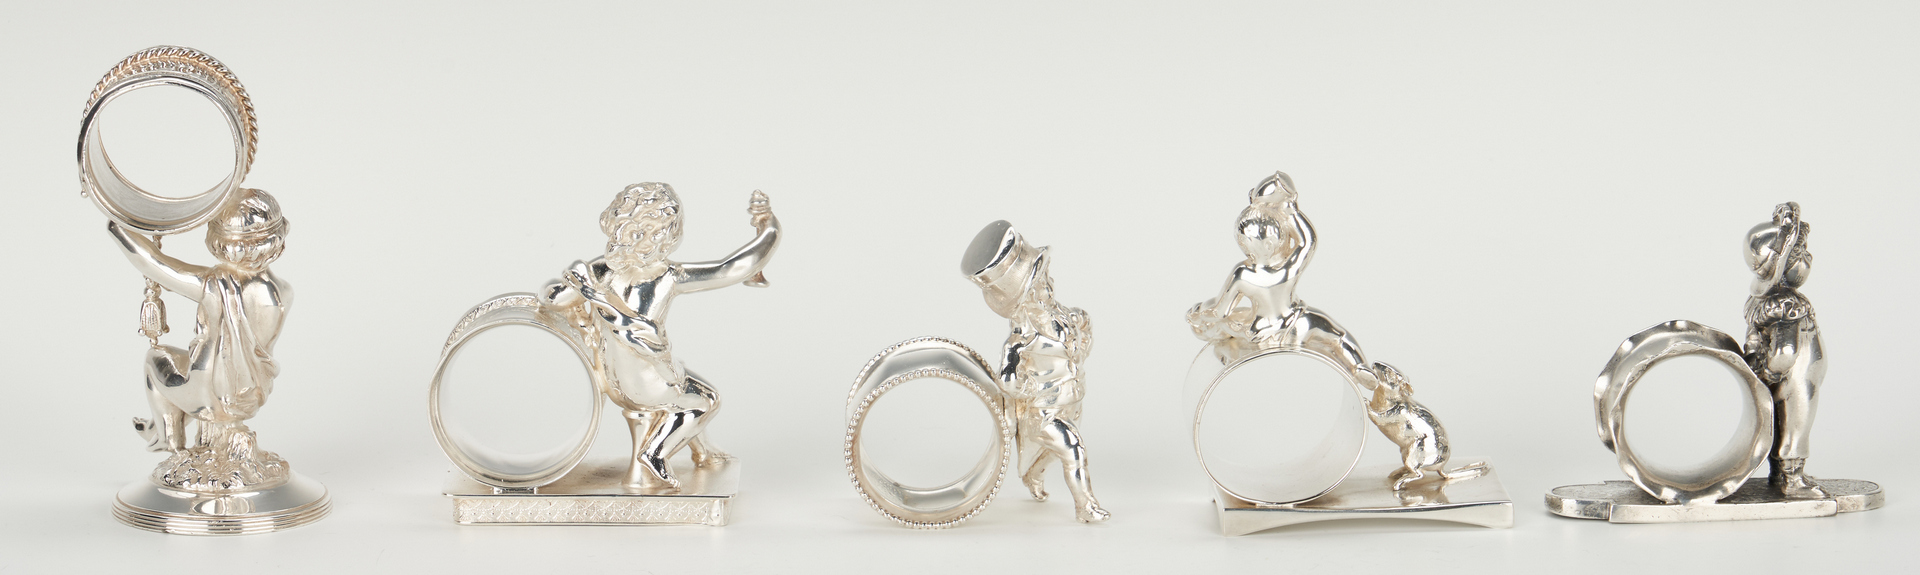 Lot 250: 13 Silverplated Napkin Rings incl. Figural Children